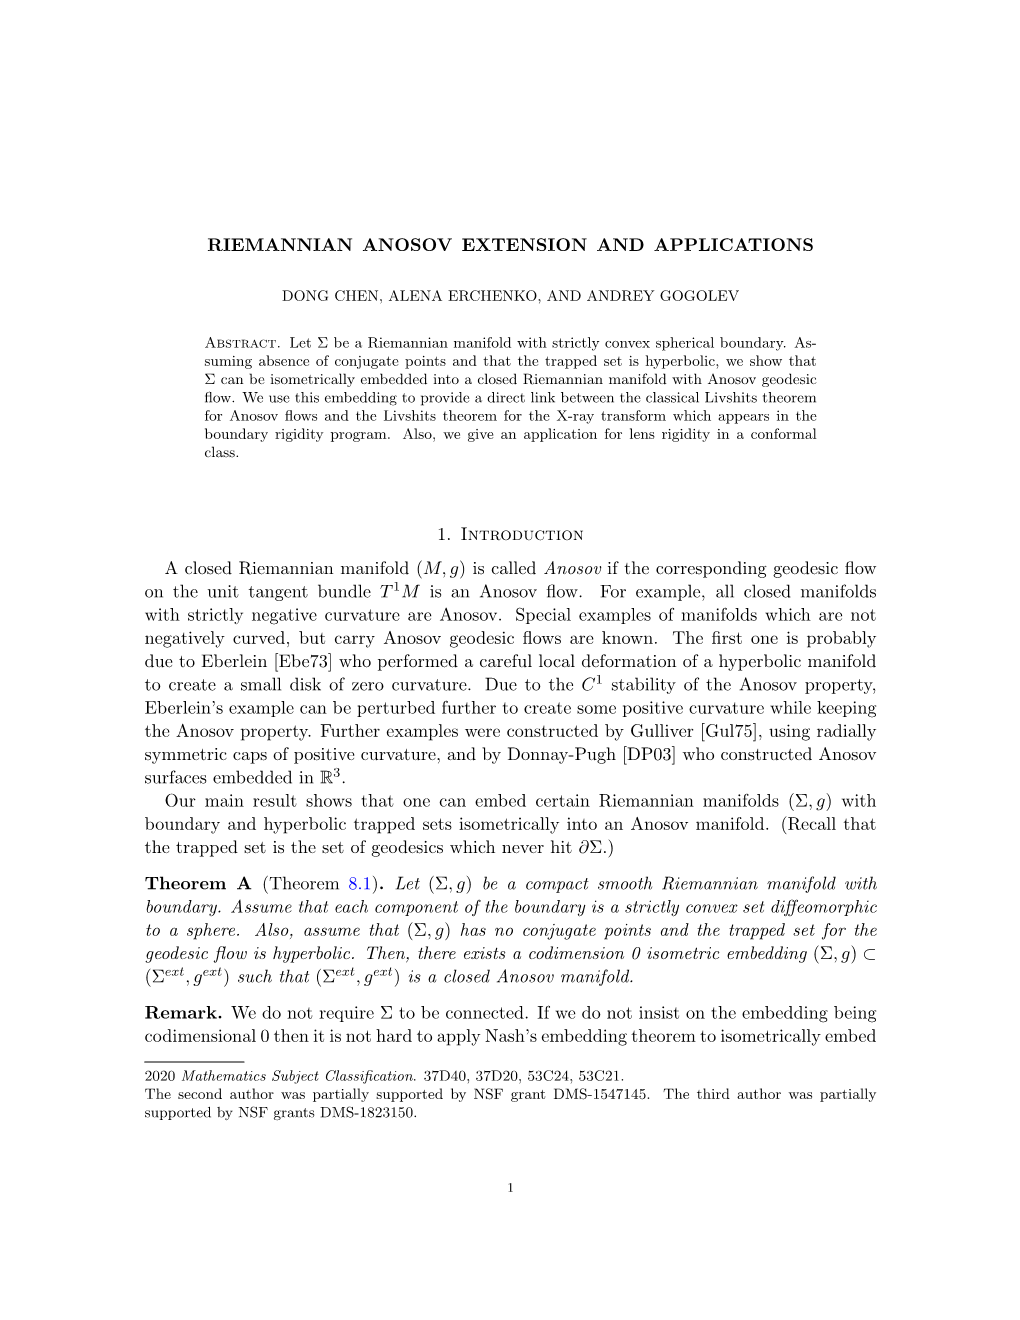 Riemannian Anosov Extension and Applications